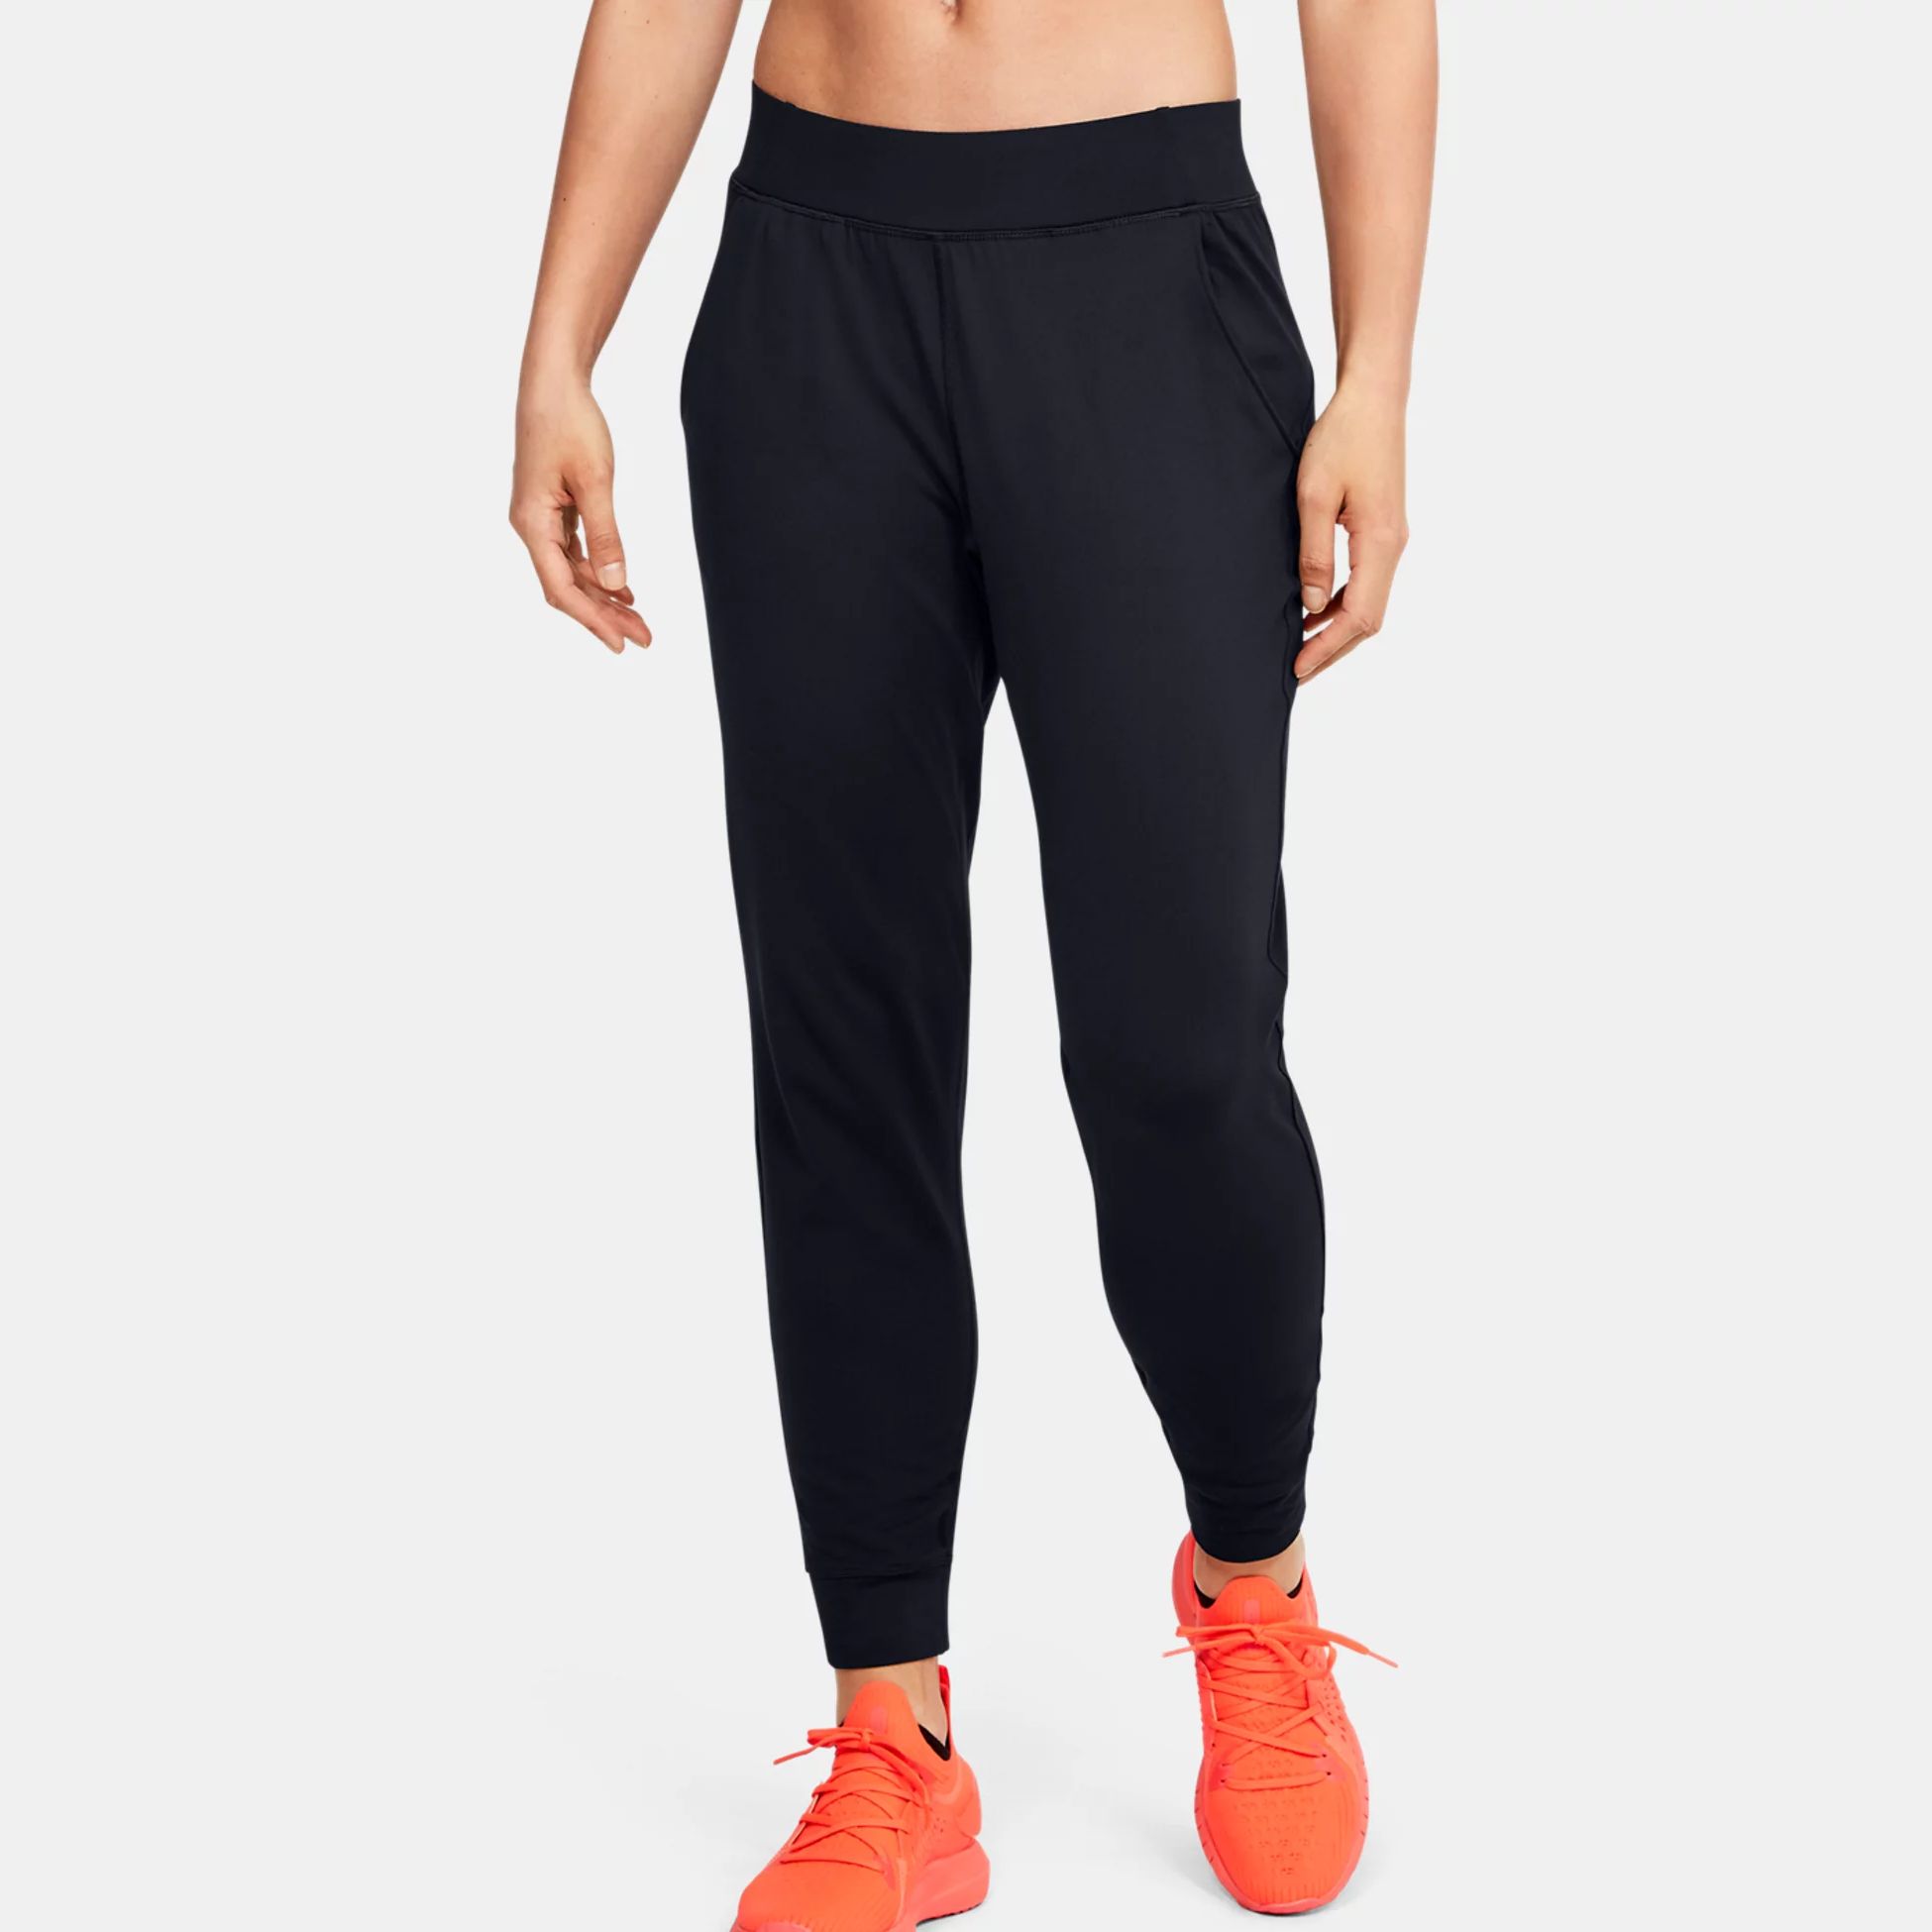 Leggings Under Armour Meridian Jogger-GRY 